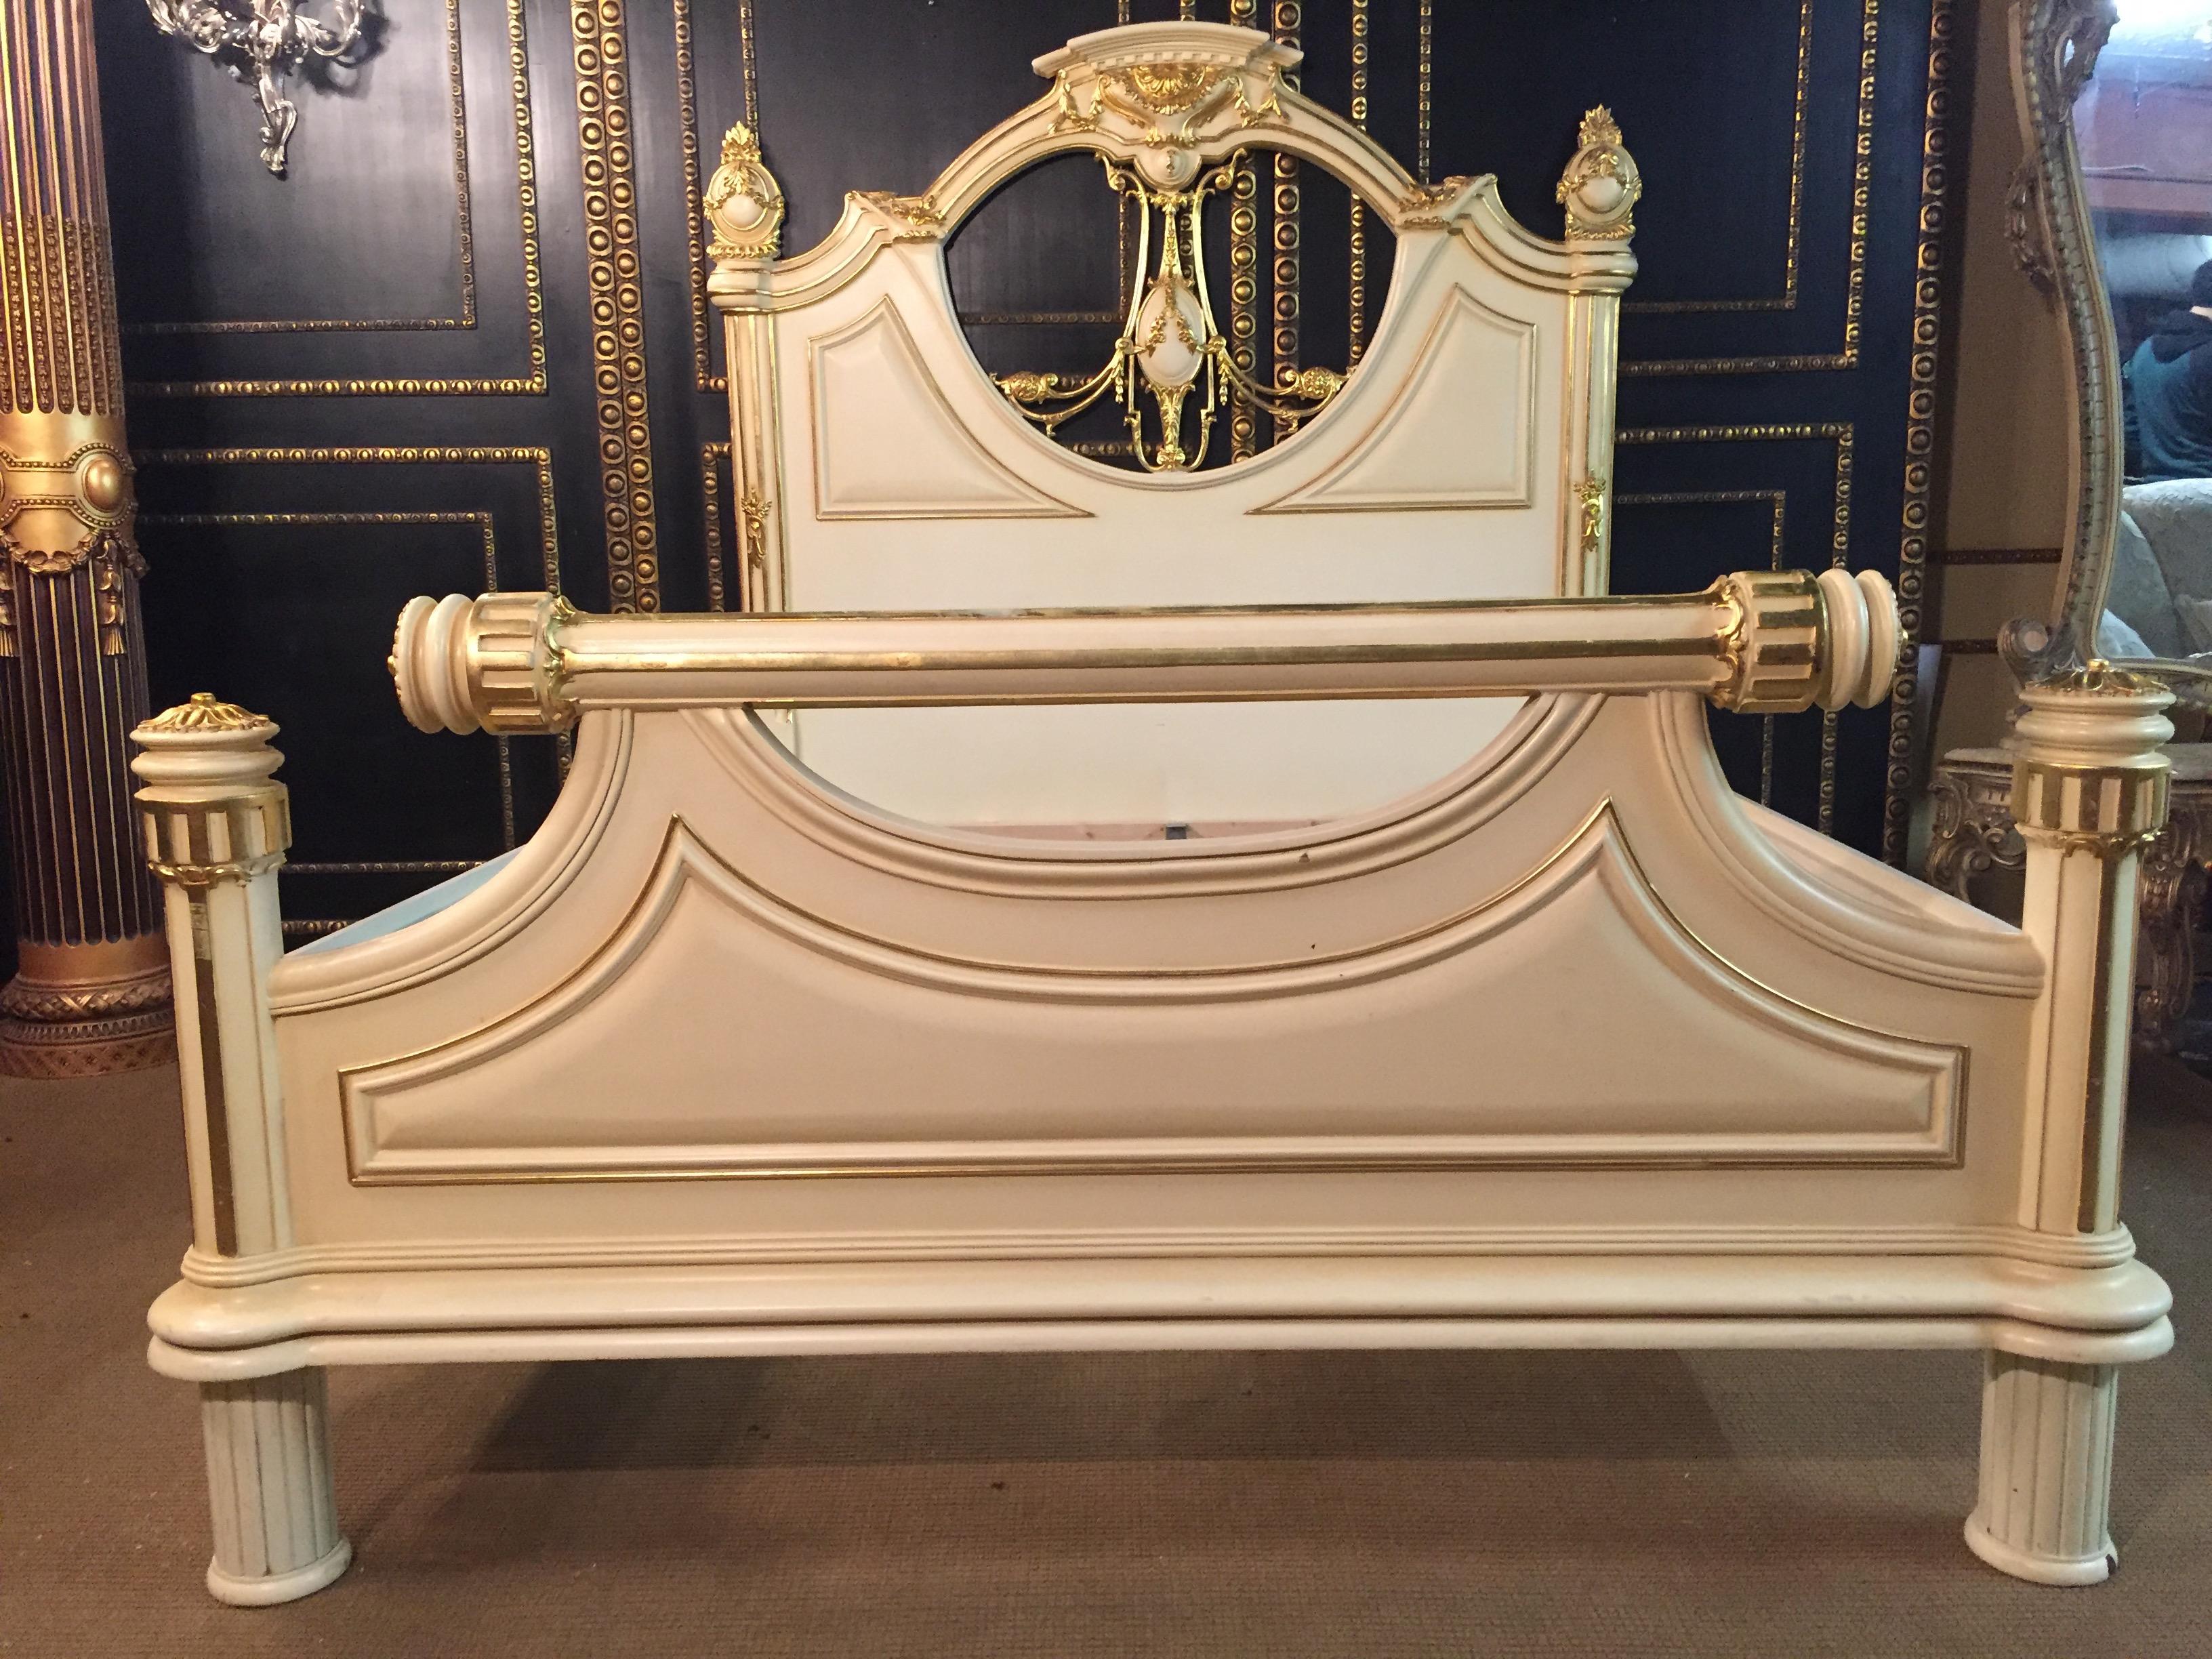 Majestic Baroque bed in the style of Louis XVI. Solid beechwood, finely carved, colored and gilded. Low foot and high headboard, double braided, curved backrest framing. Openwork rocaille crowning. Internal dimension for mattress is 180 cm x 200